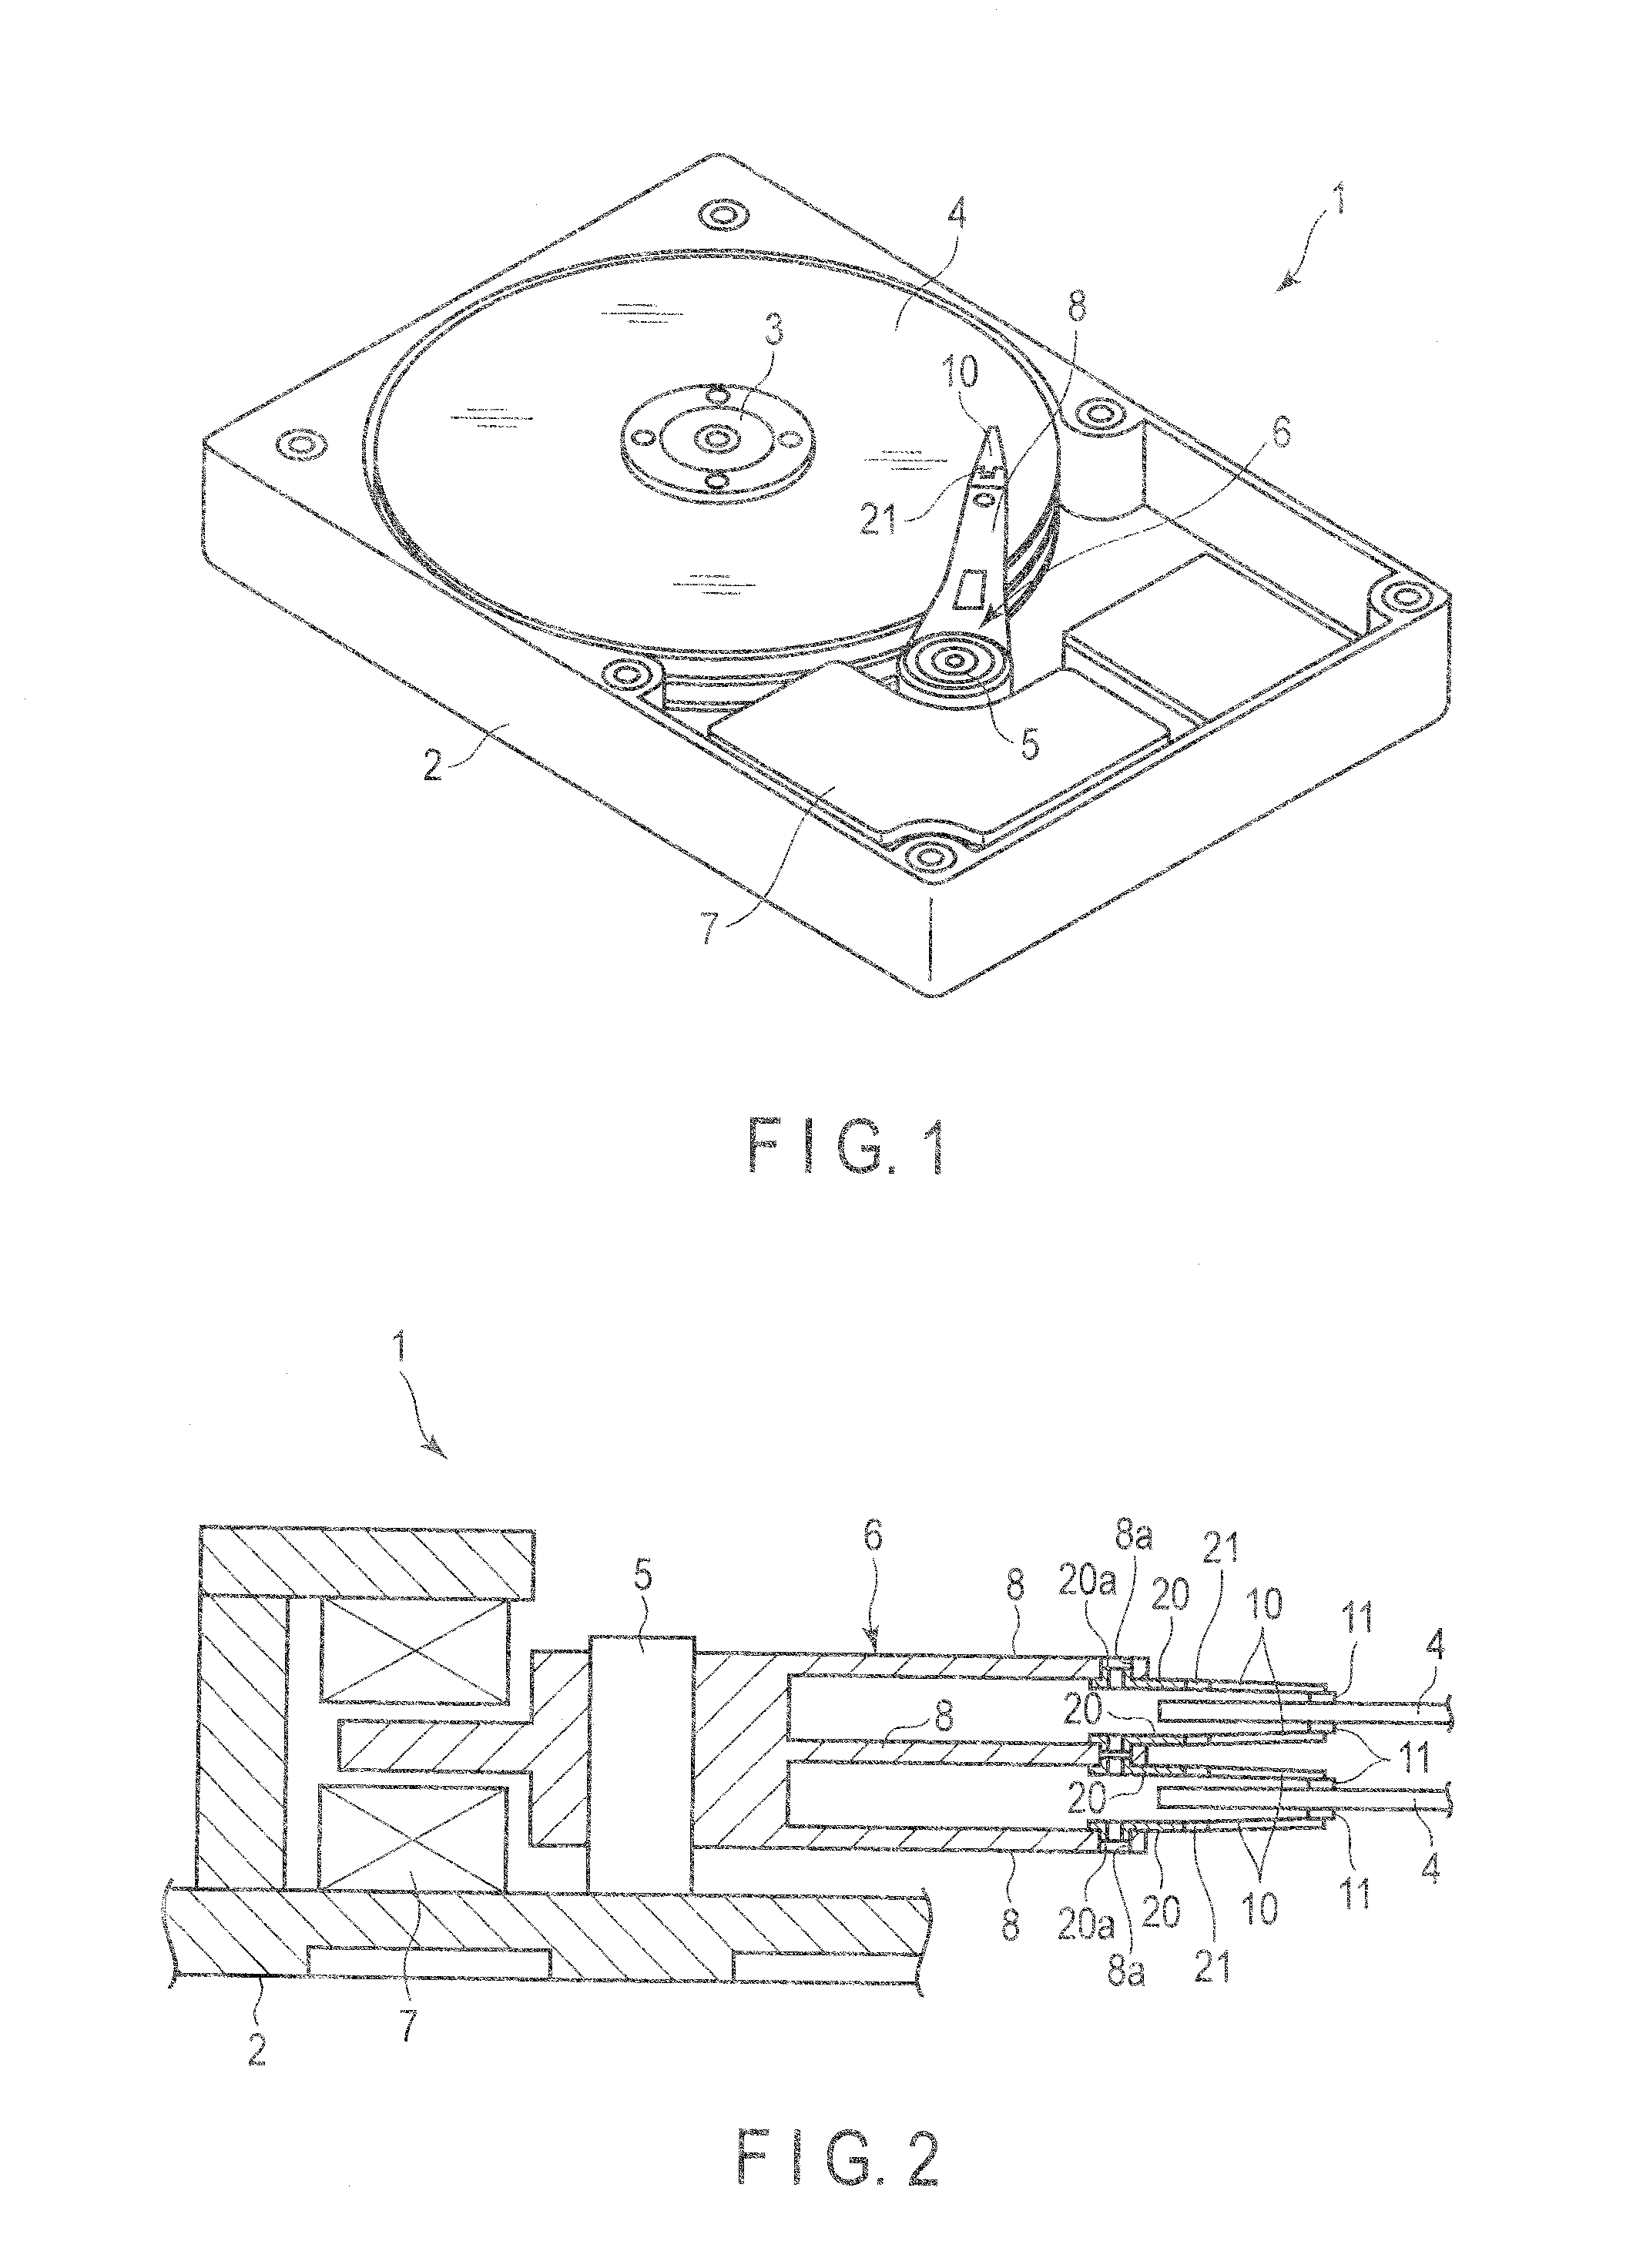 Actuator mounting section of disk drive suspension, method of applying electrically conductive paste, and paste application device